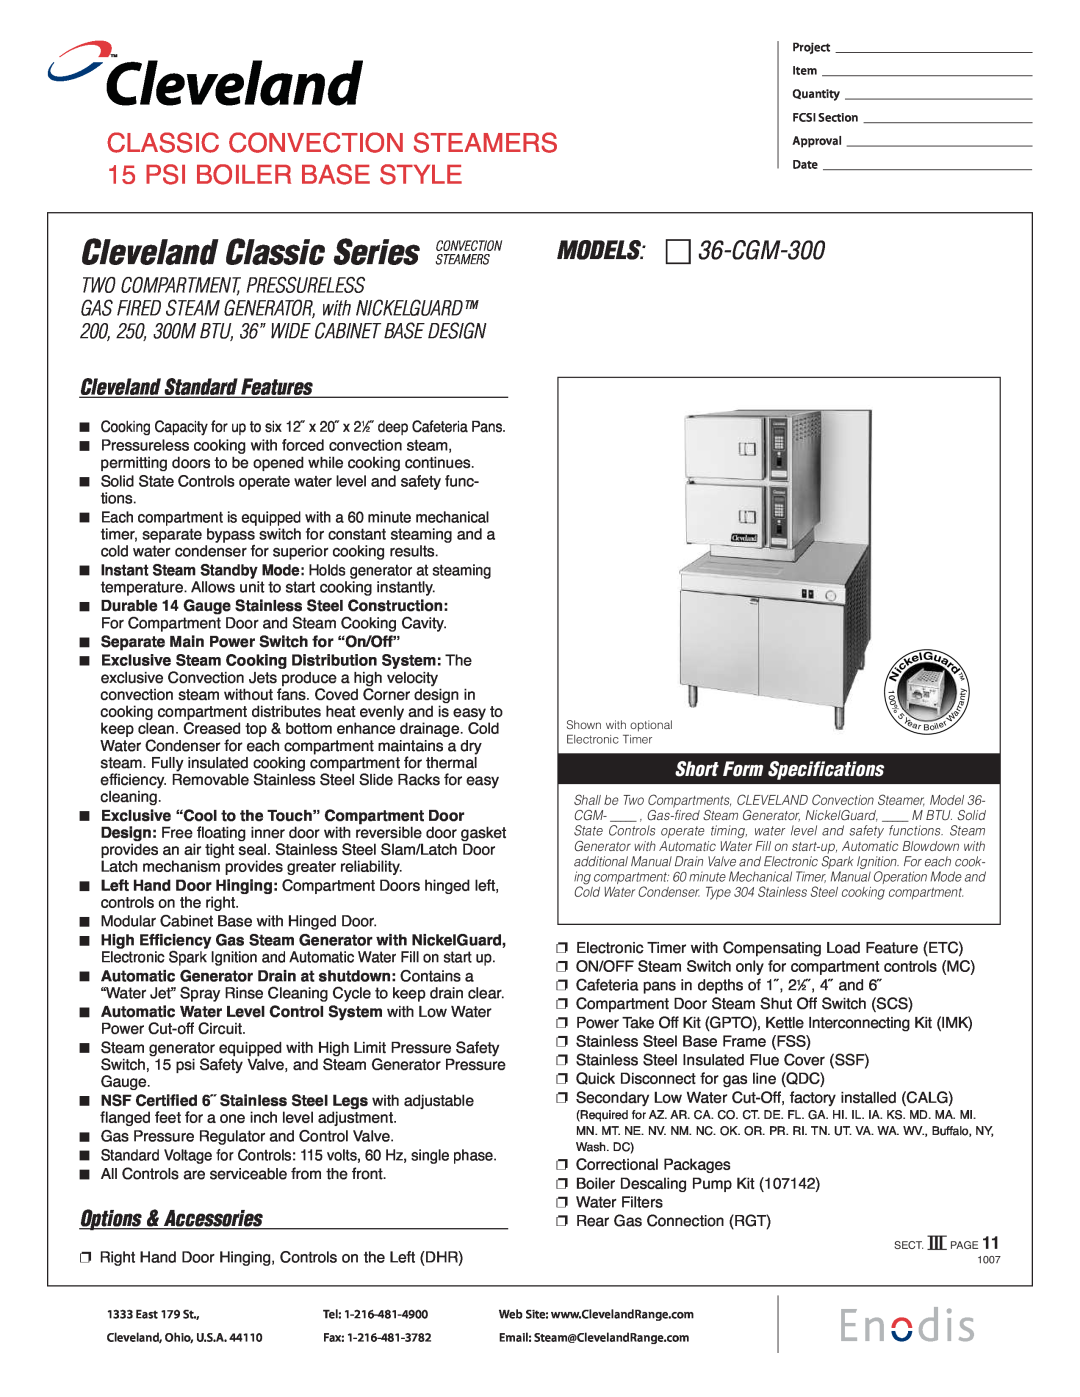 Cleveland Range specifications Cleveland Classic Series CONVECTION, MODELS 36-CGM-300, Cleveland Standard Features 